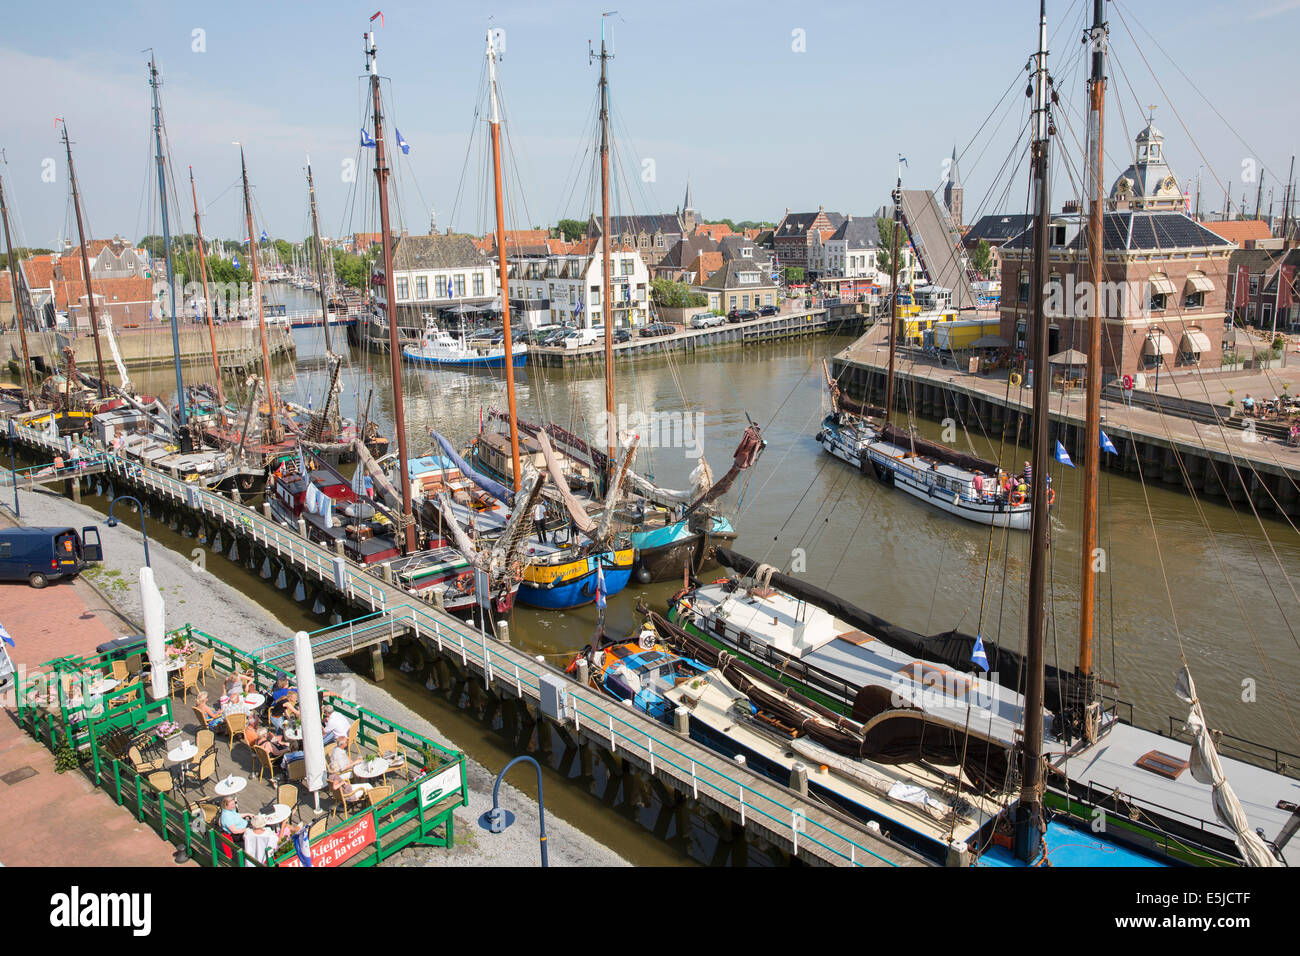 Netherlands, Harlingen, Harbor. Traditional sailing boats and outdoor terrace Stock Photo